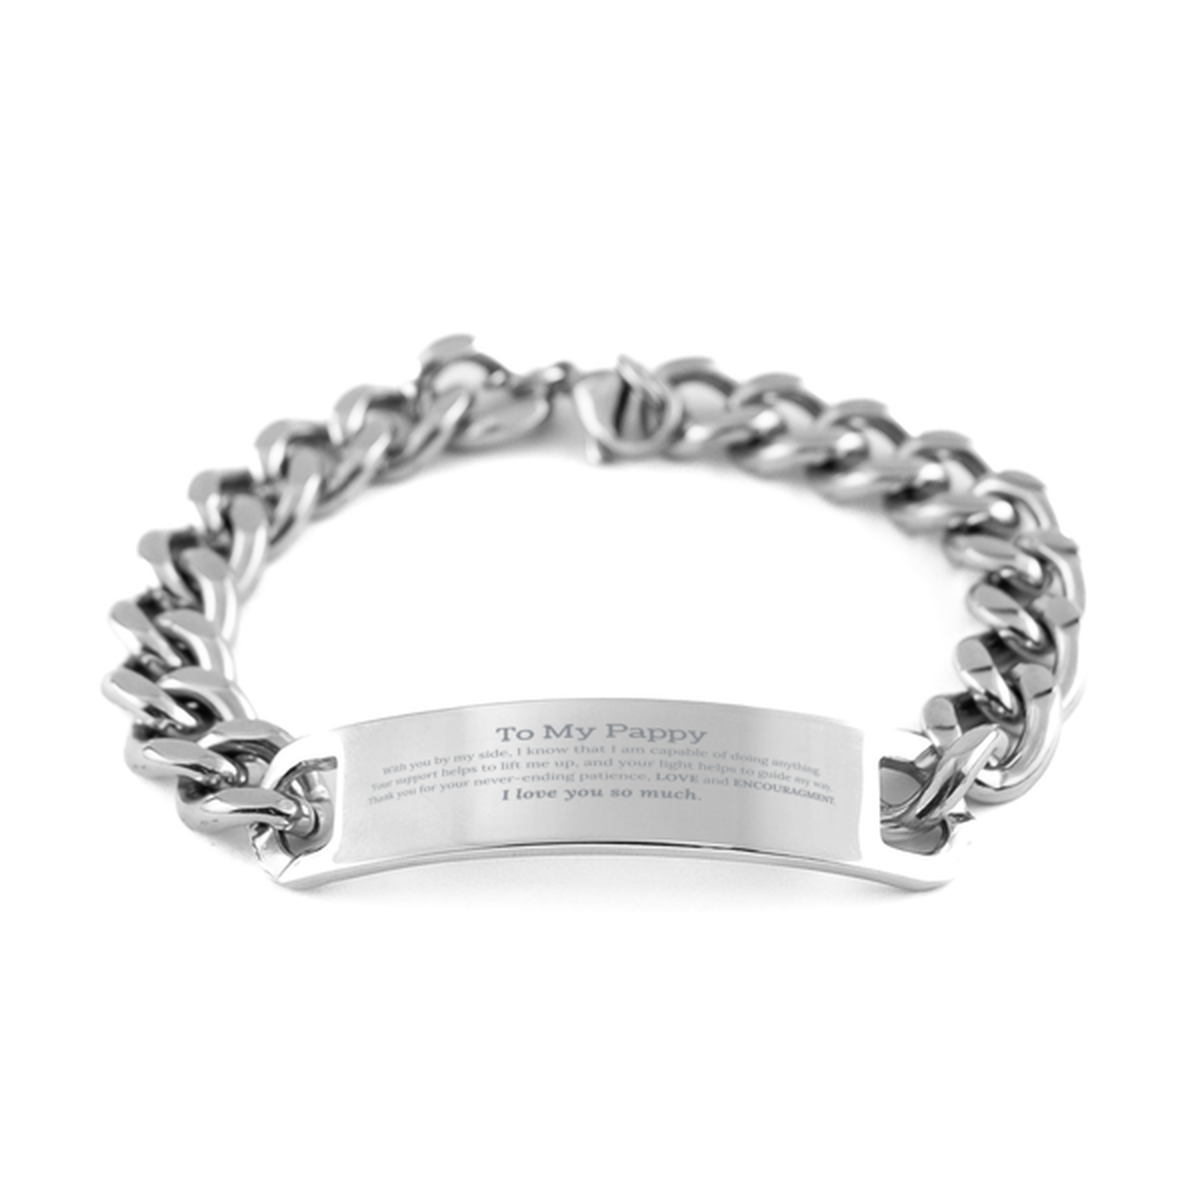 Appreciation Pappy Cuban Chain Stainless Steel Bracelet Gifts, To My Pappy Birthday Christmas Wedding Keepsake Gifts for Pappy With you by my side, I know that I am capable of doing anything. I love you so much